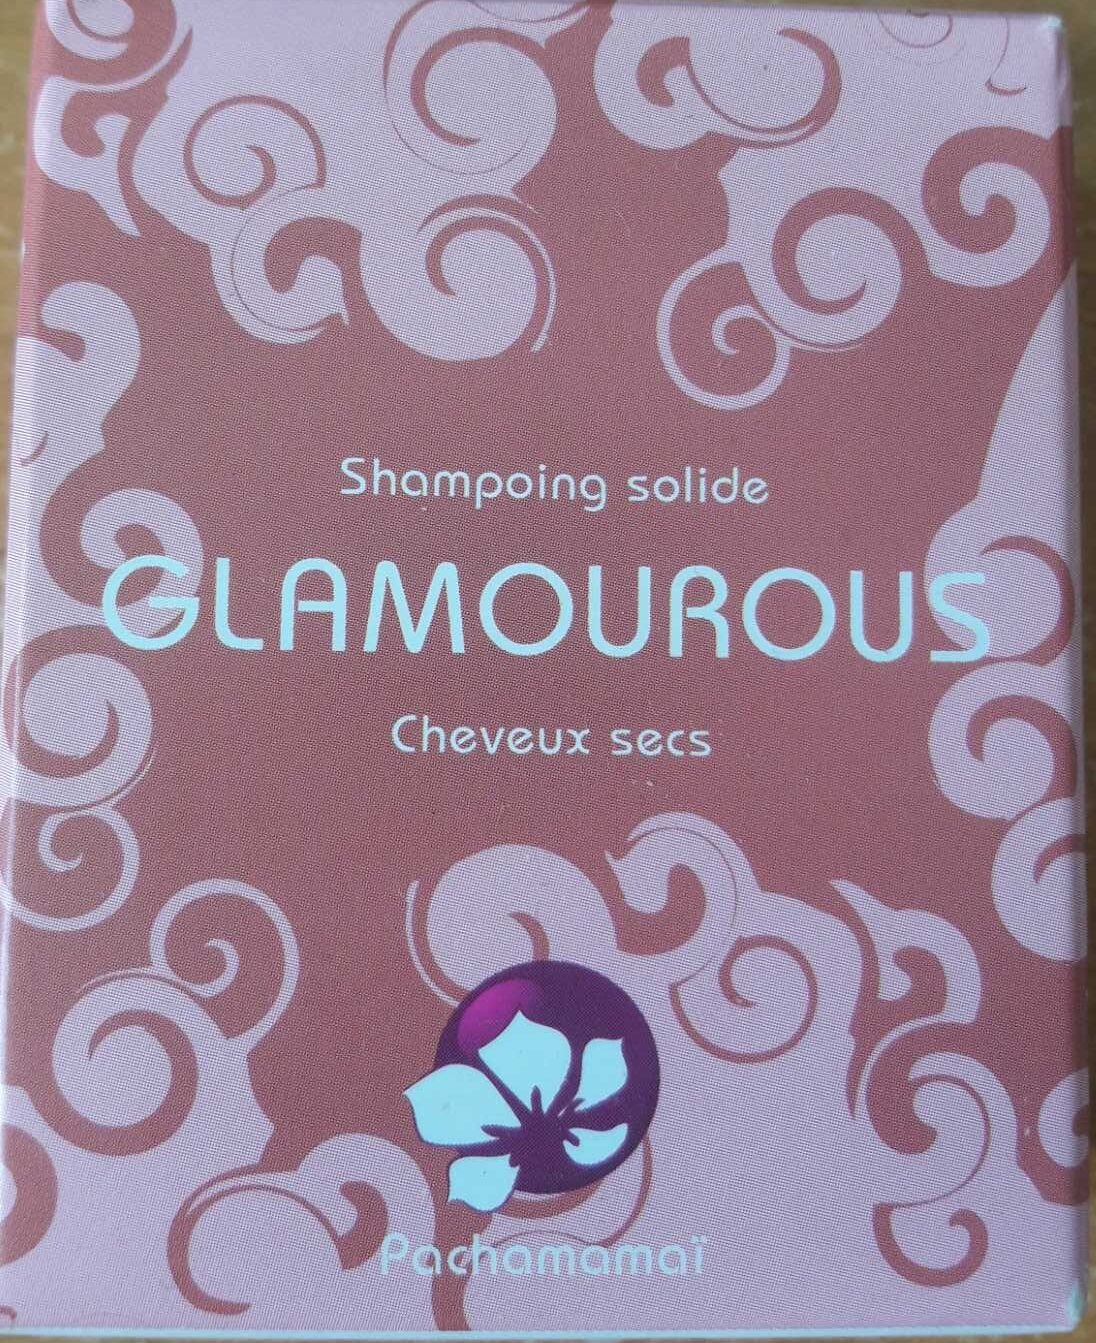 Shampoing solide - Glamourous - Cheveux secs - Tuote - fr